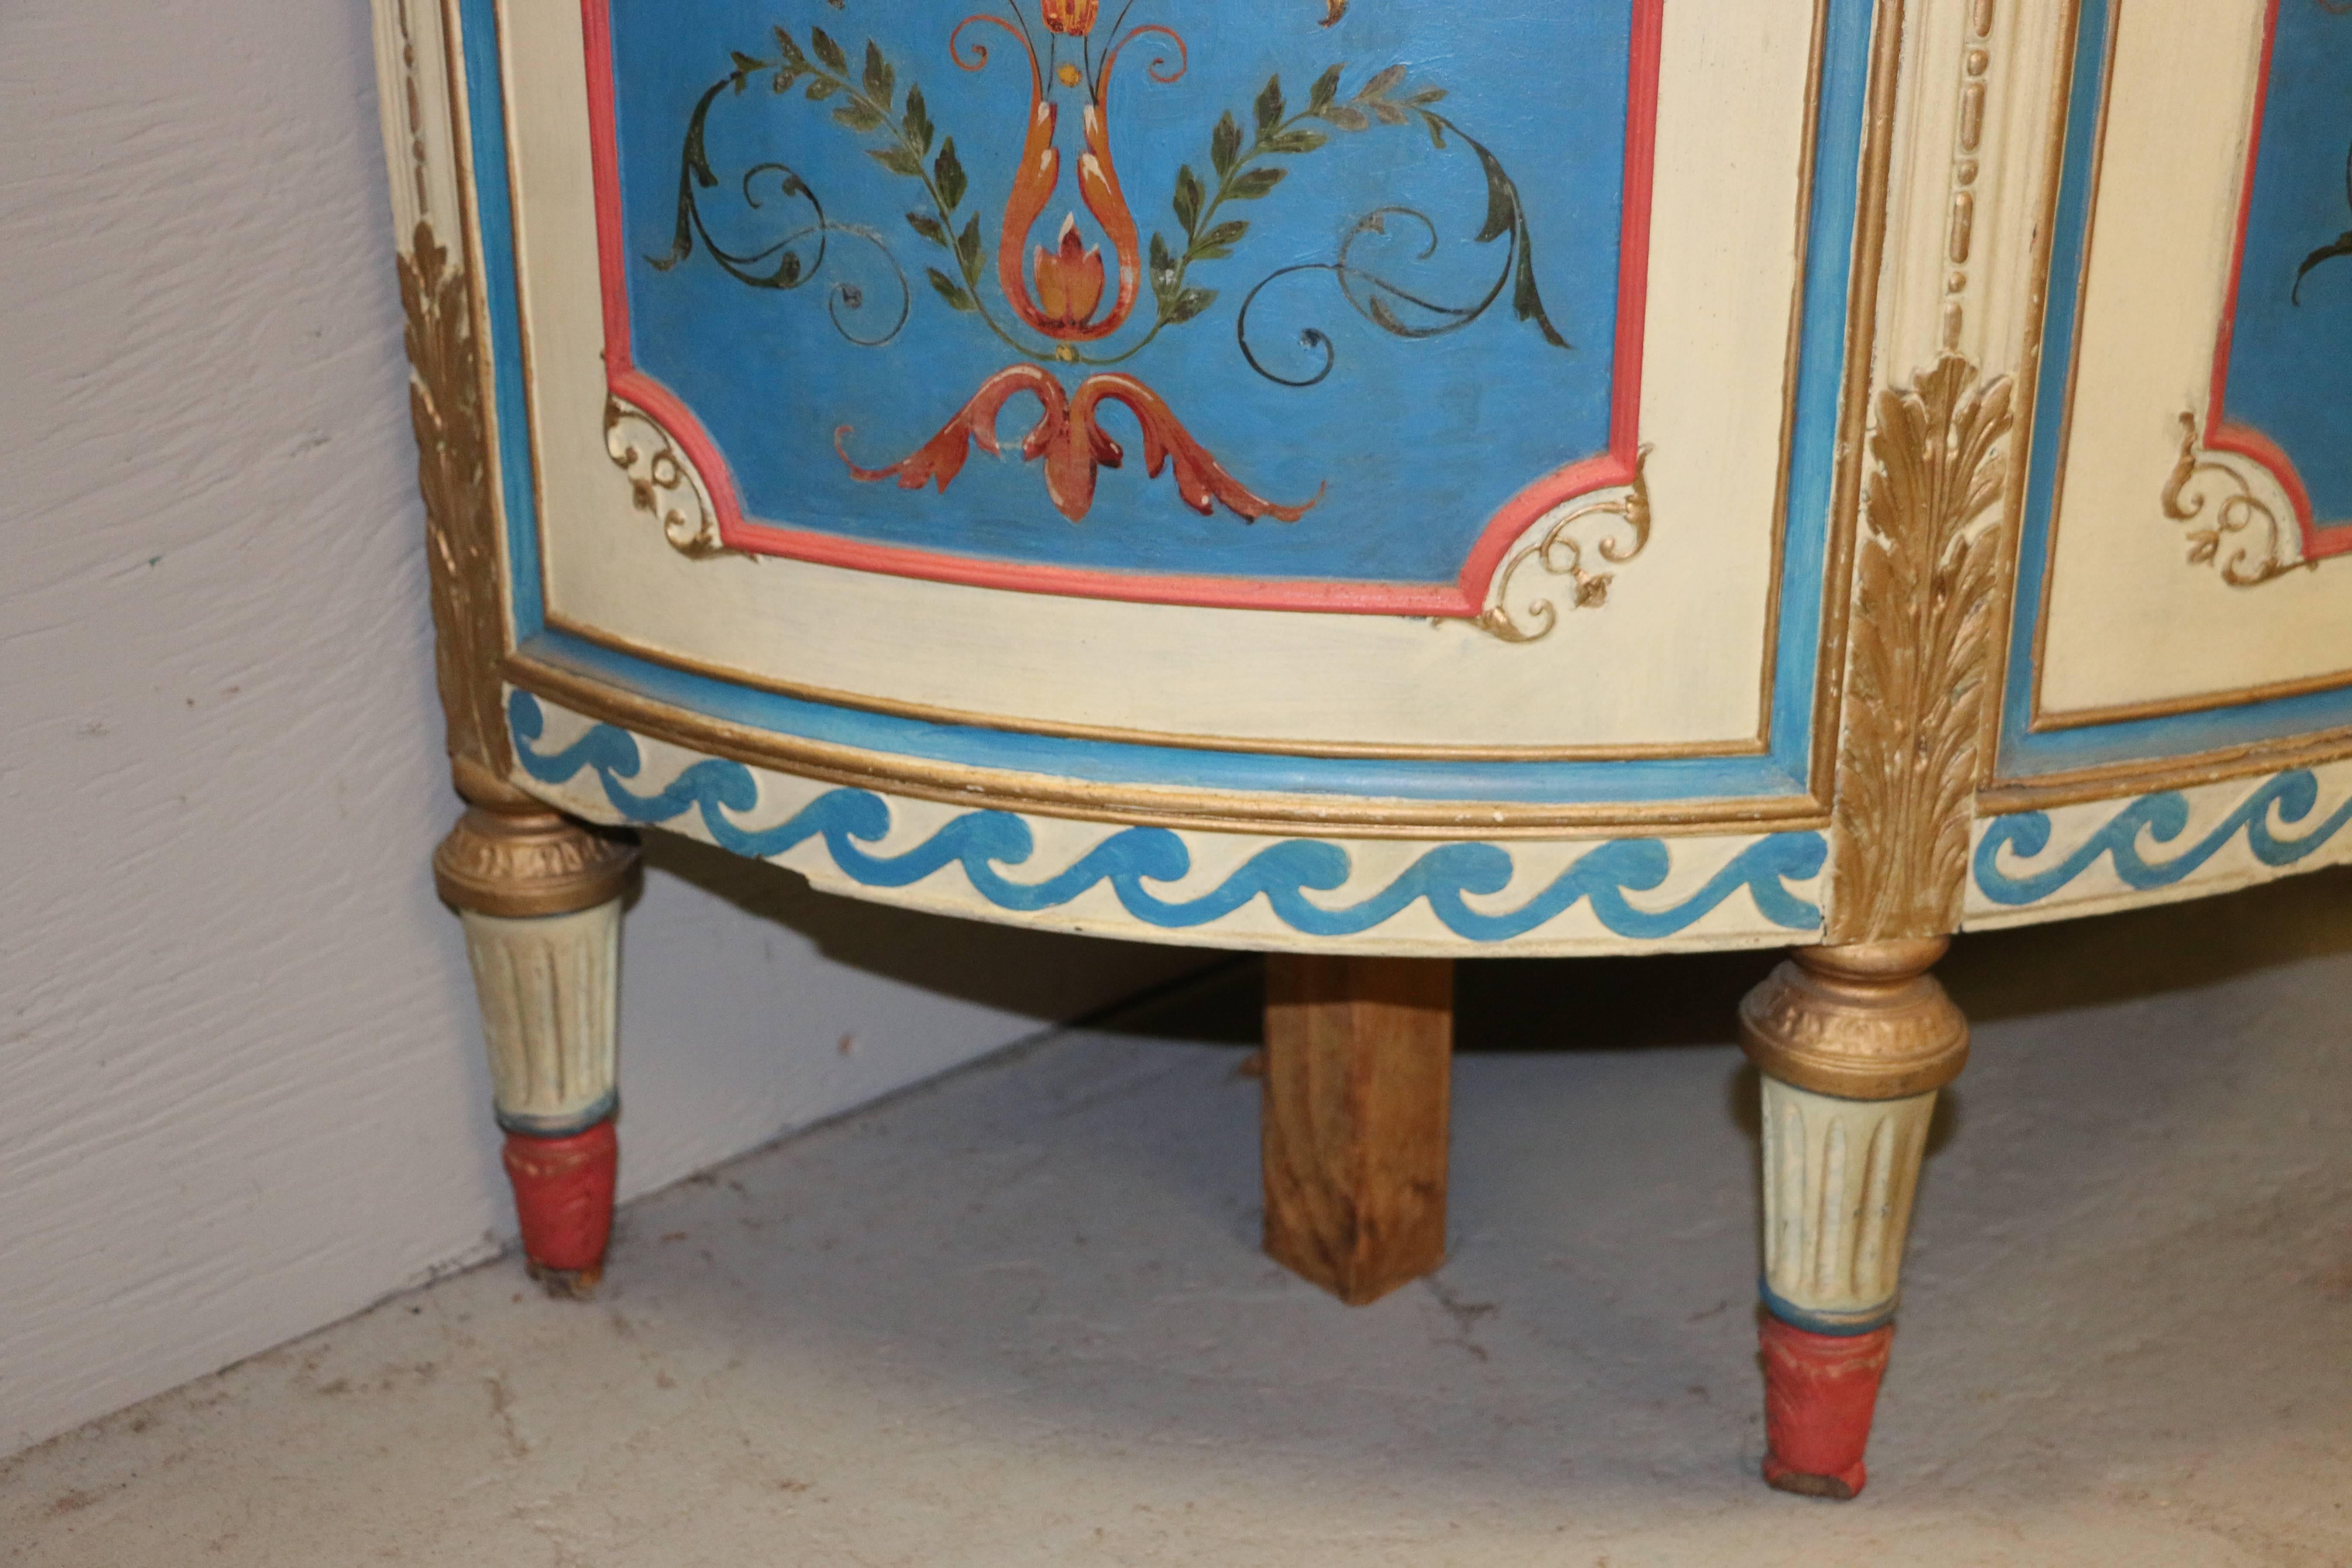 Wood Hand-Painted Antique Demilune Cabinet